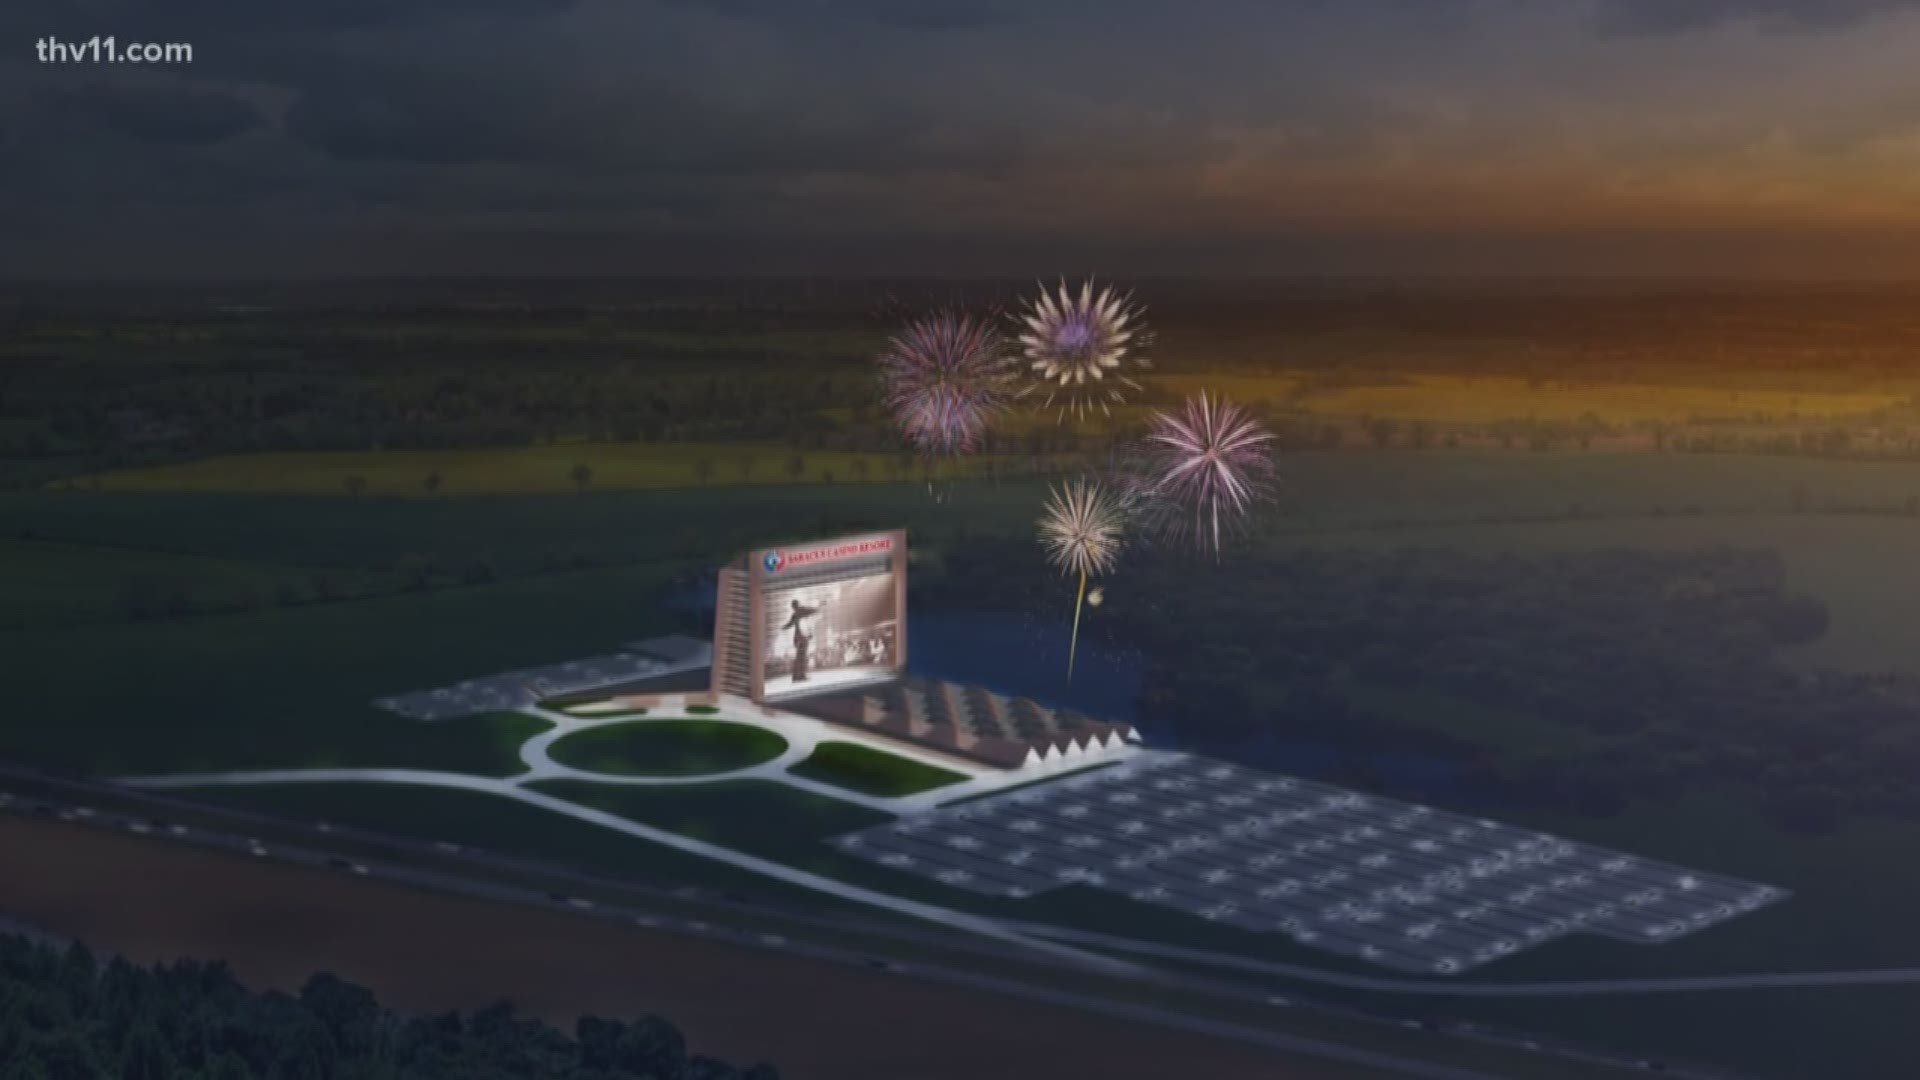 People in Jefferson county could see a casino take shape sooner than expected after the Quapaw Tribe released new details about future plans.